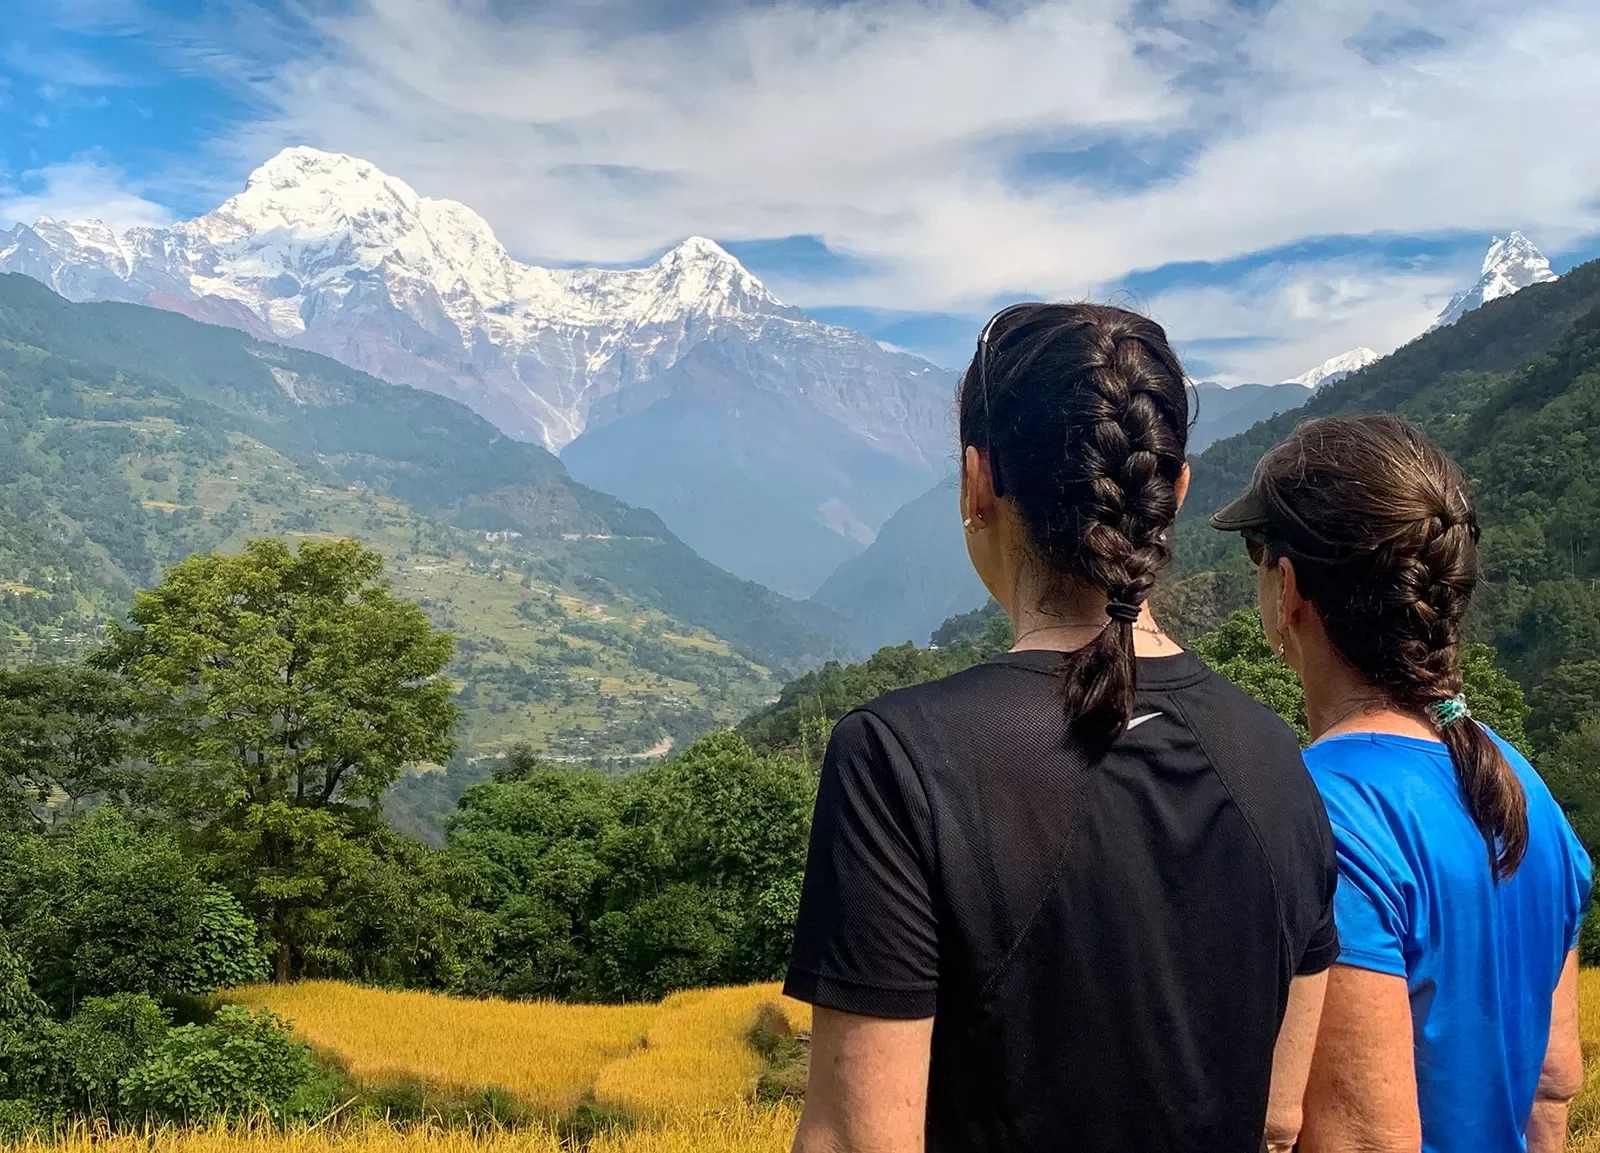 Gazing out over a valley in the mountains of Nepal